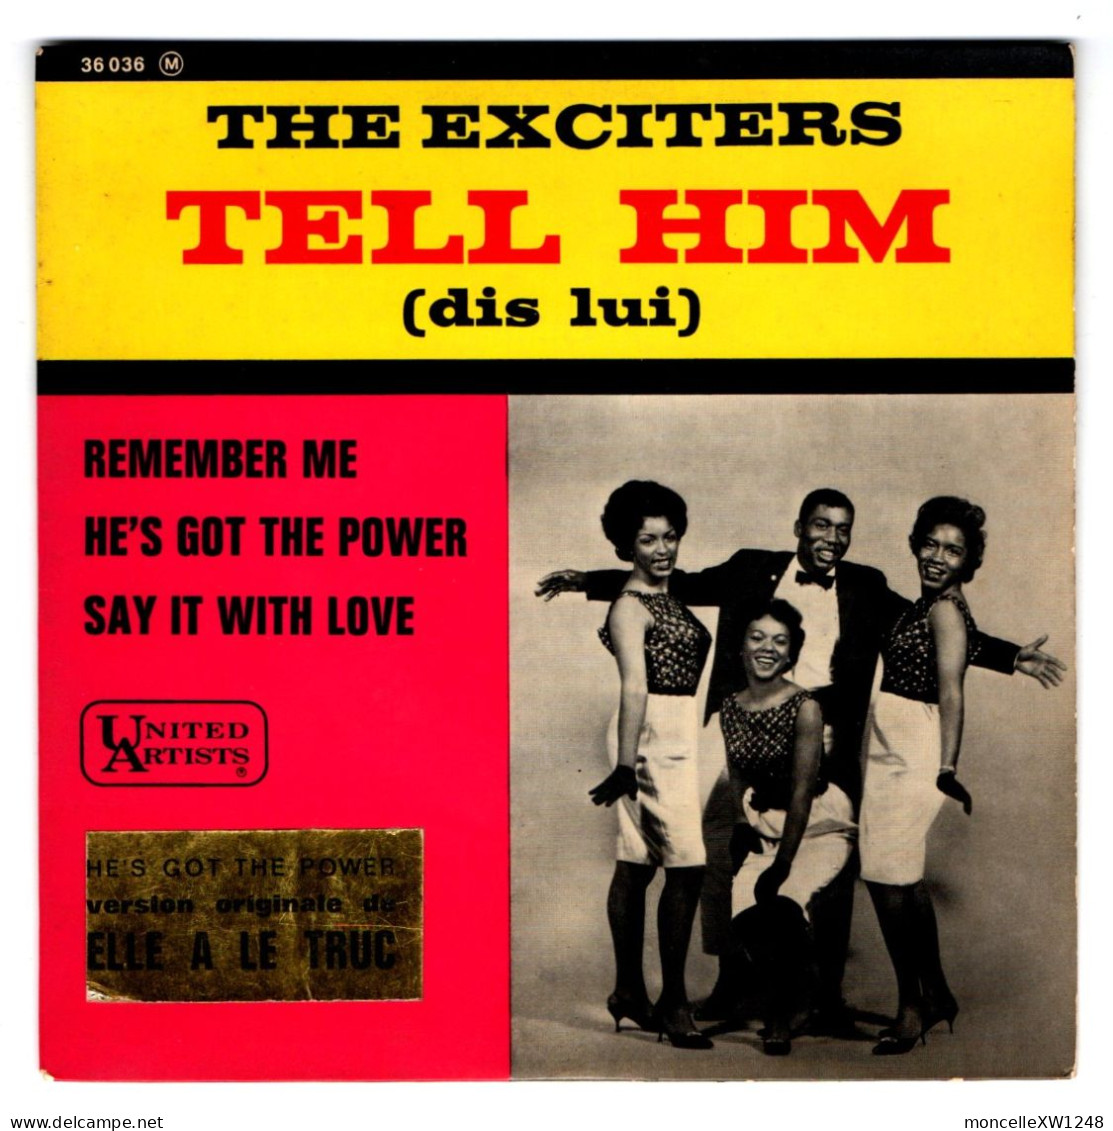 The Exciters - 45 T EP Tell Him (1963) - 45 Toeren - Maxi-Single